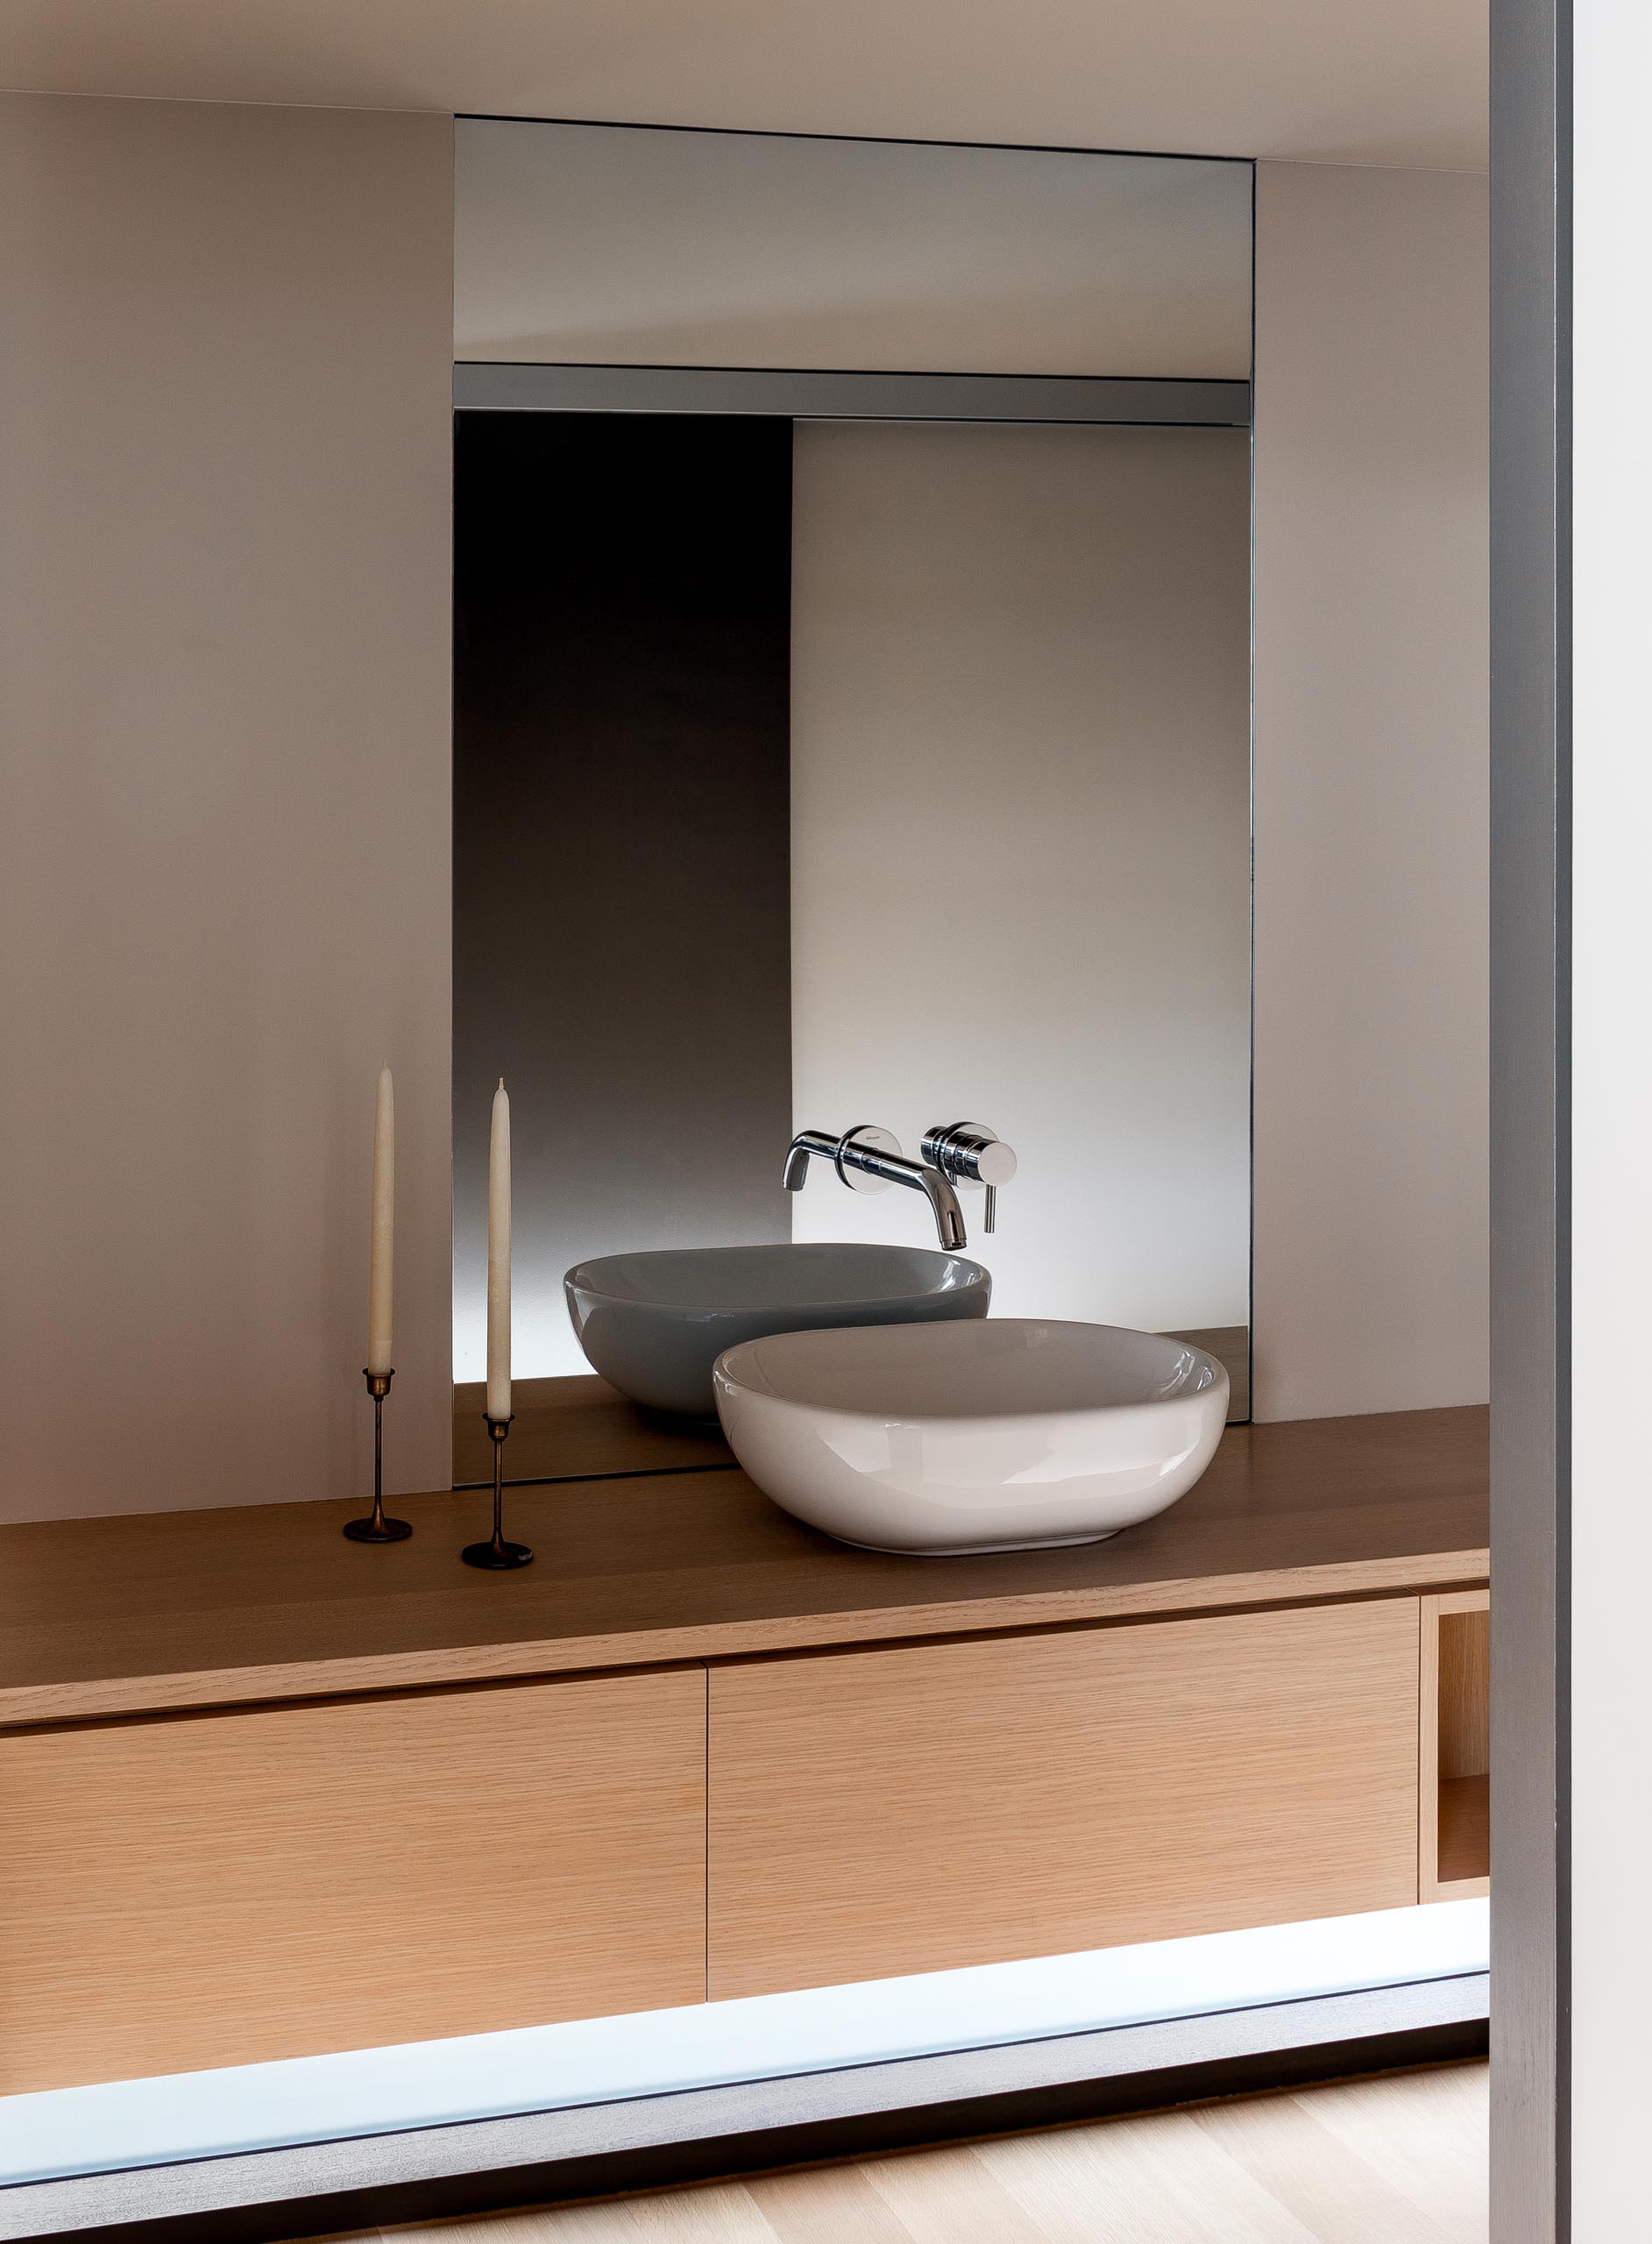 In this modern bathroom, there's a floating wood vanity with hidden lighting tucked away in the corner.